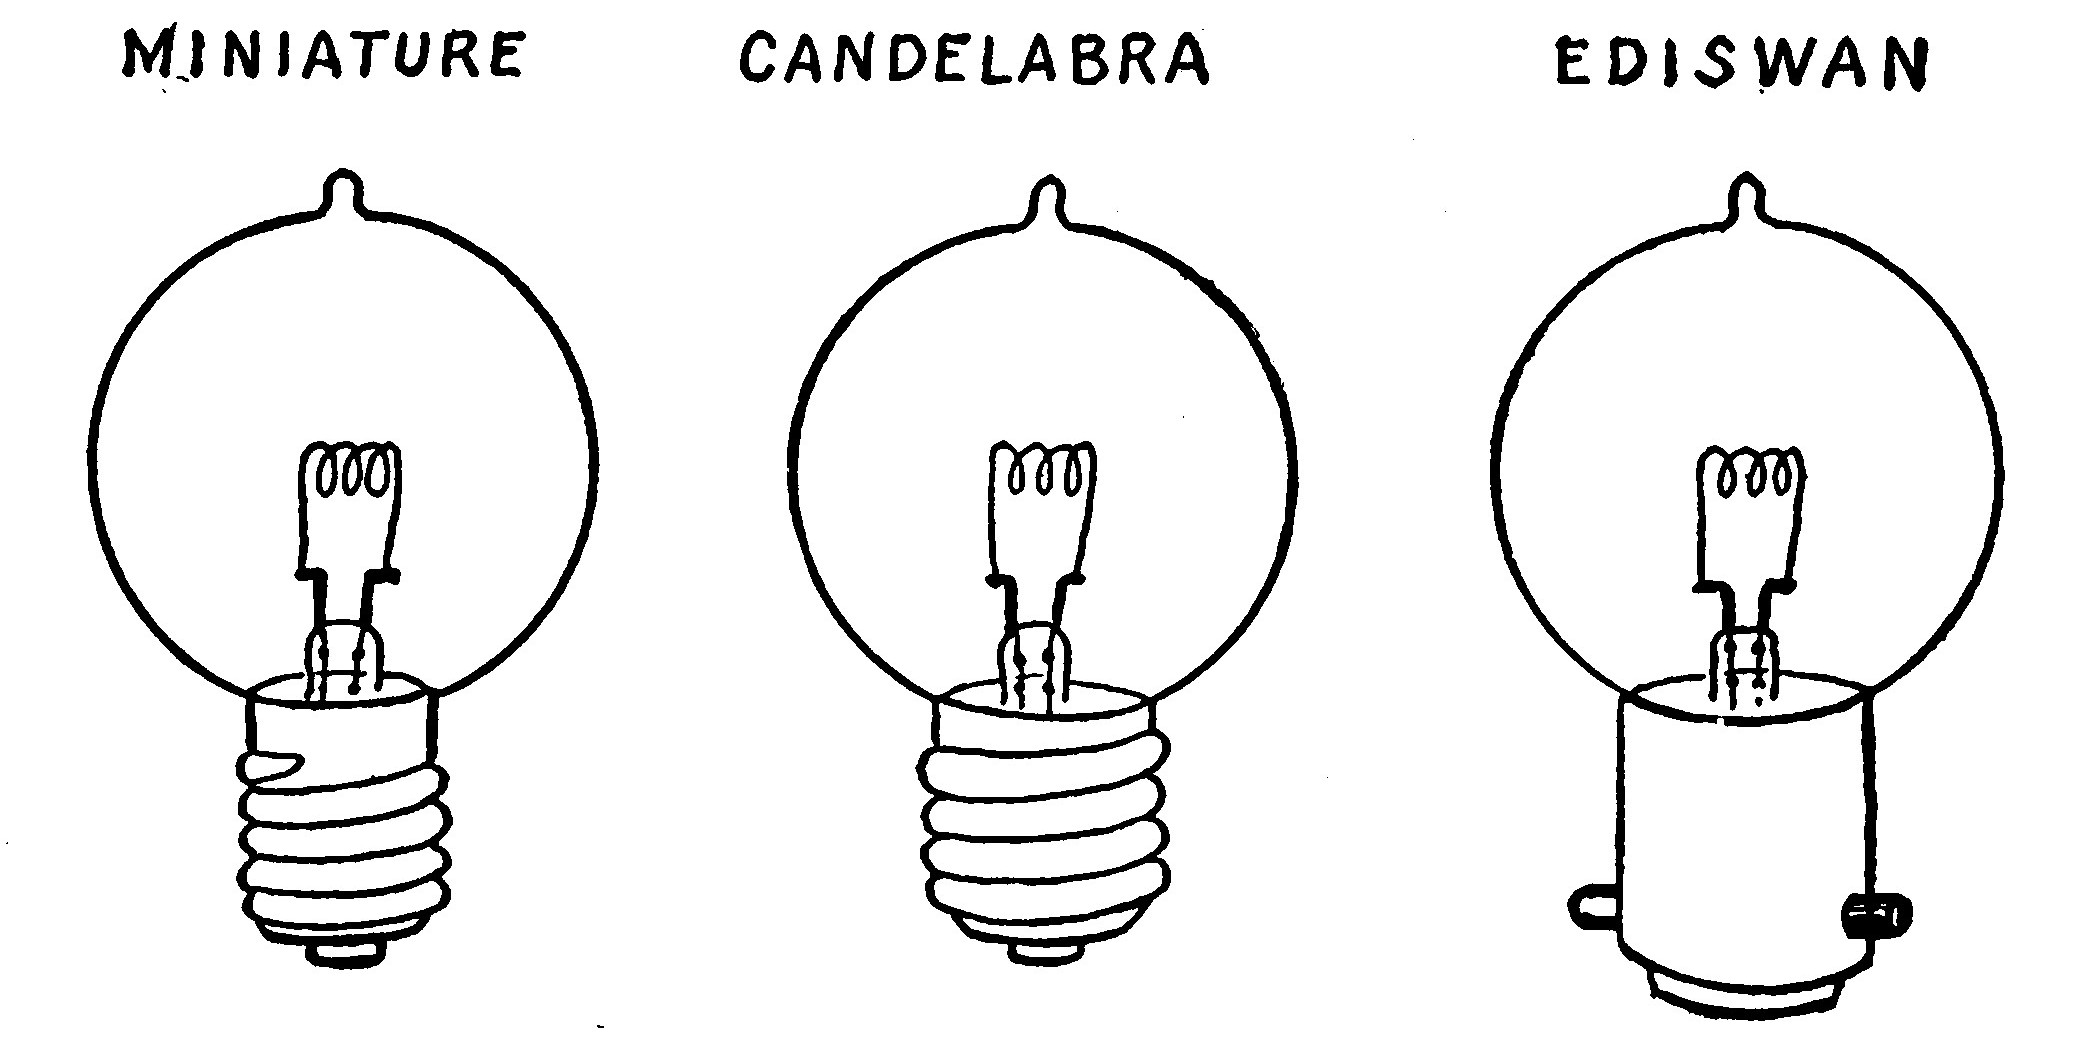 Fig. 283.—Lamps fitted respectively with Miniature, Candelabra, and Ediswan Bases.